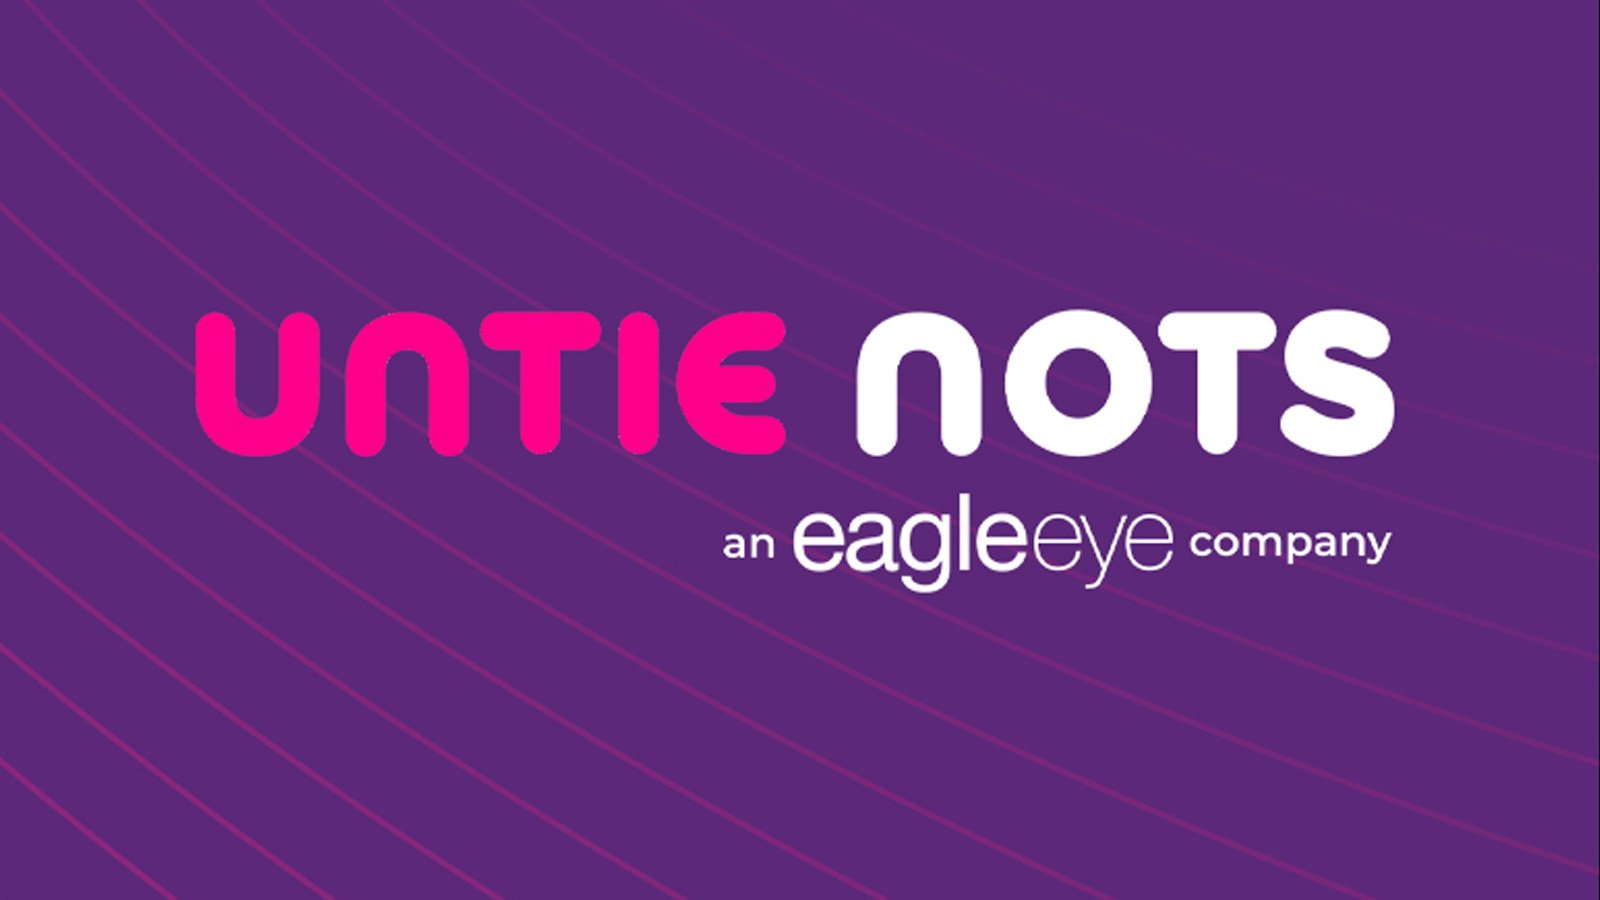 Eagle Eye's Acquisition of Untie Nots Ushers in a New Era of Loyalty & Promotional Performance